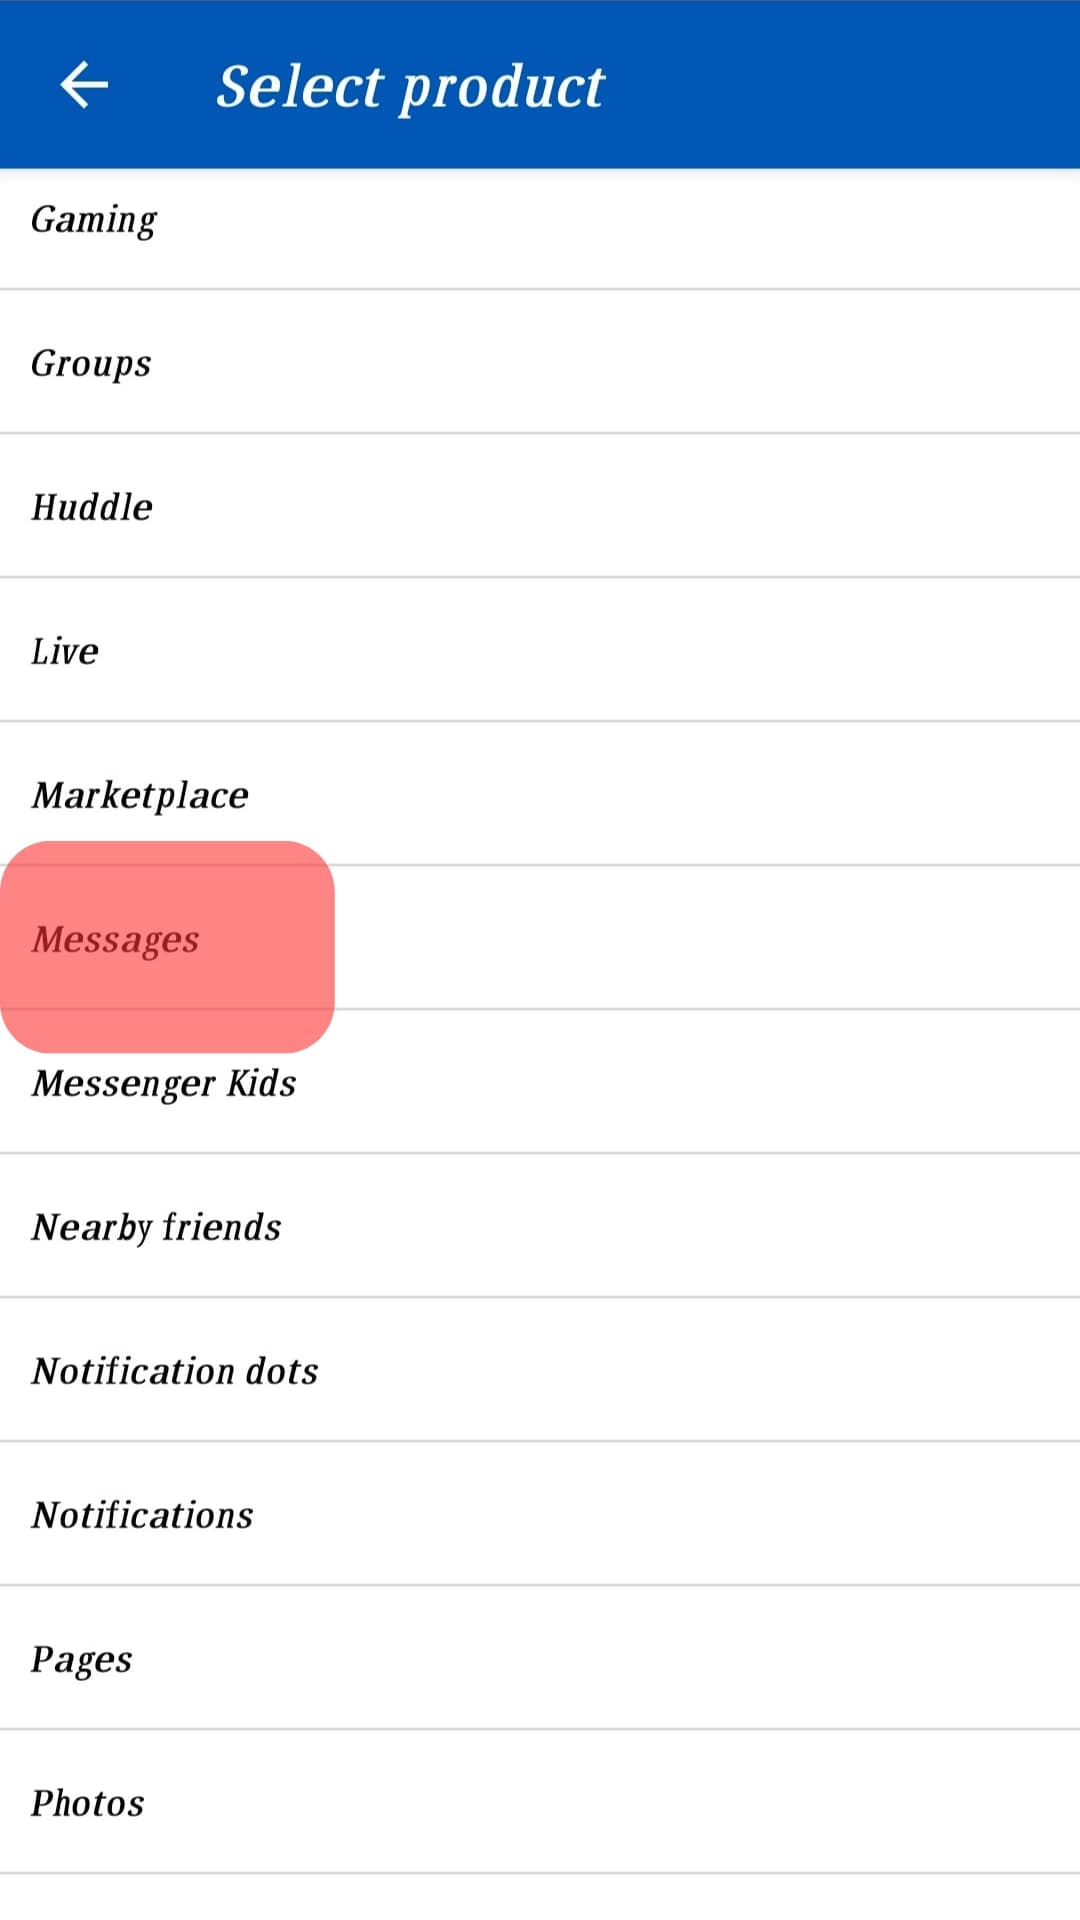 Select The Messages Option.